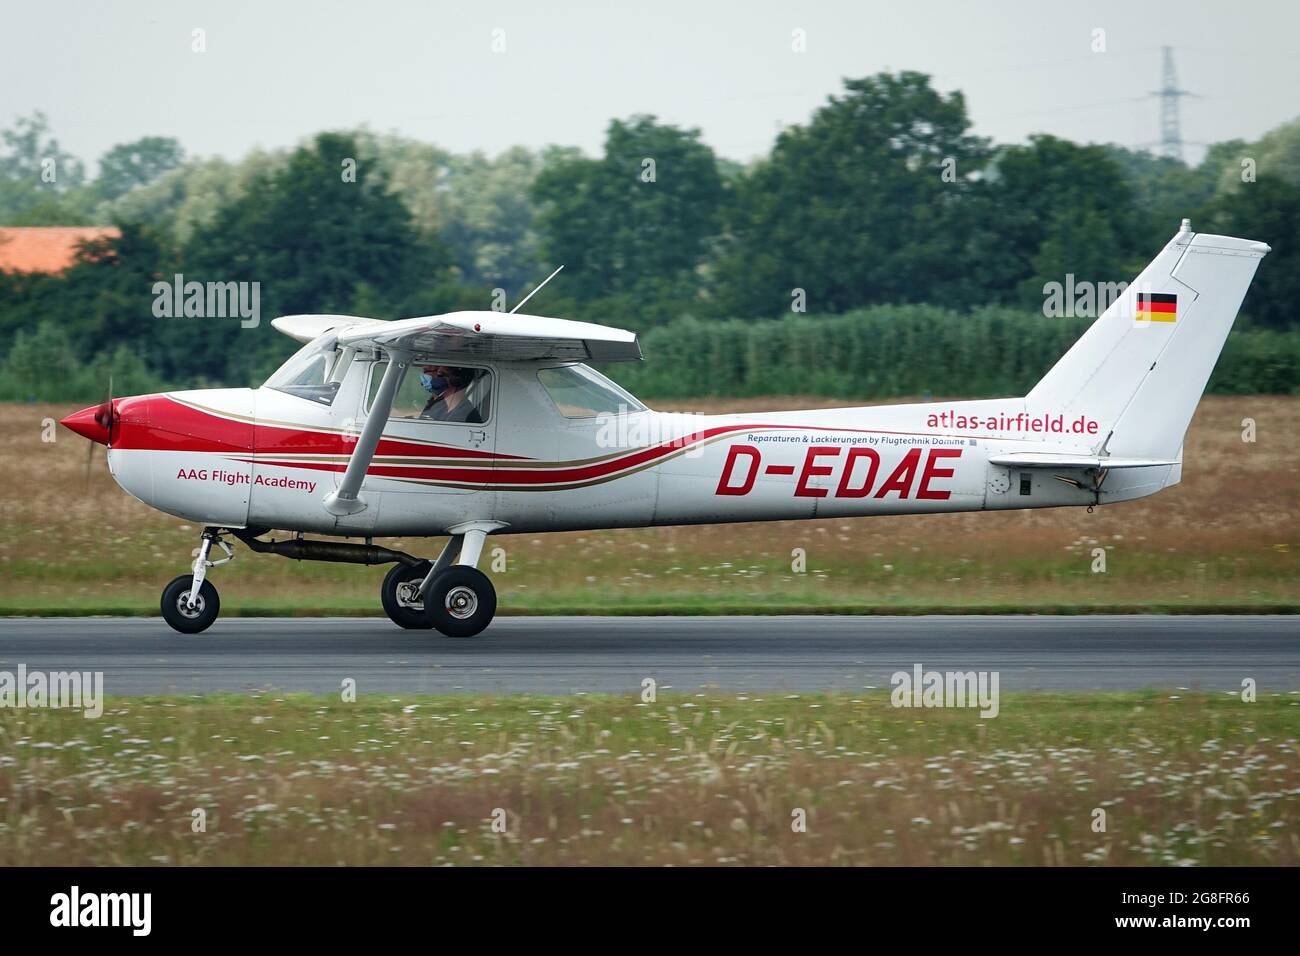 WILHELMSHAVEN, - Jul 18, 2020: A Cessna 152 light aircraft at airport of Stock Photo - Alamy